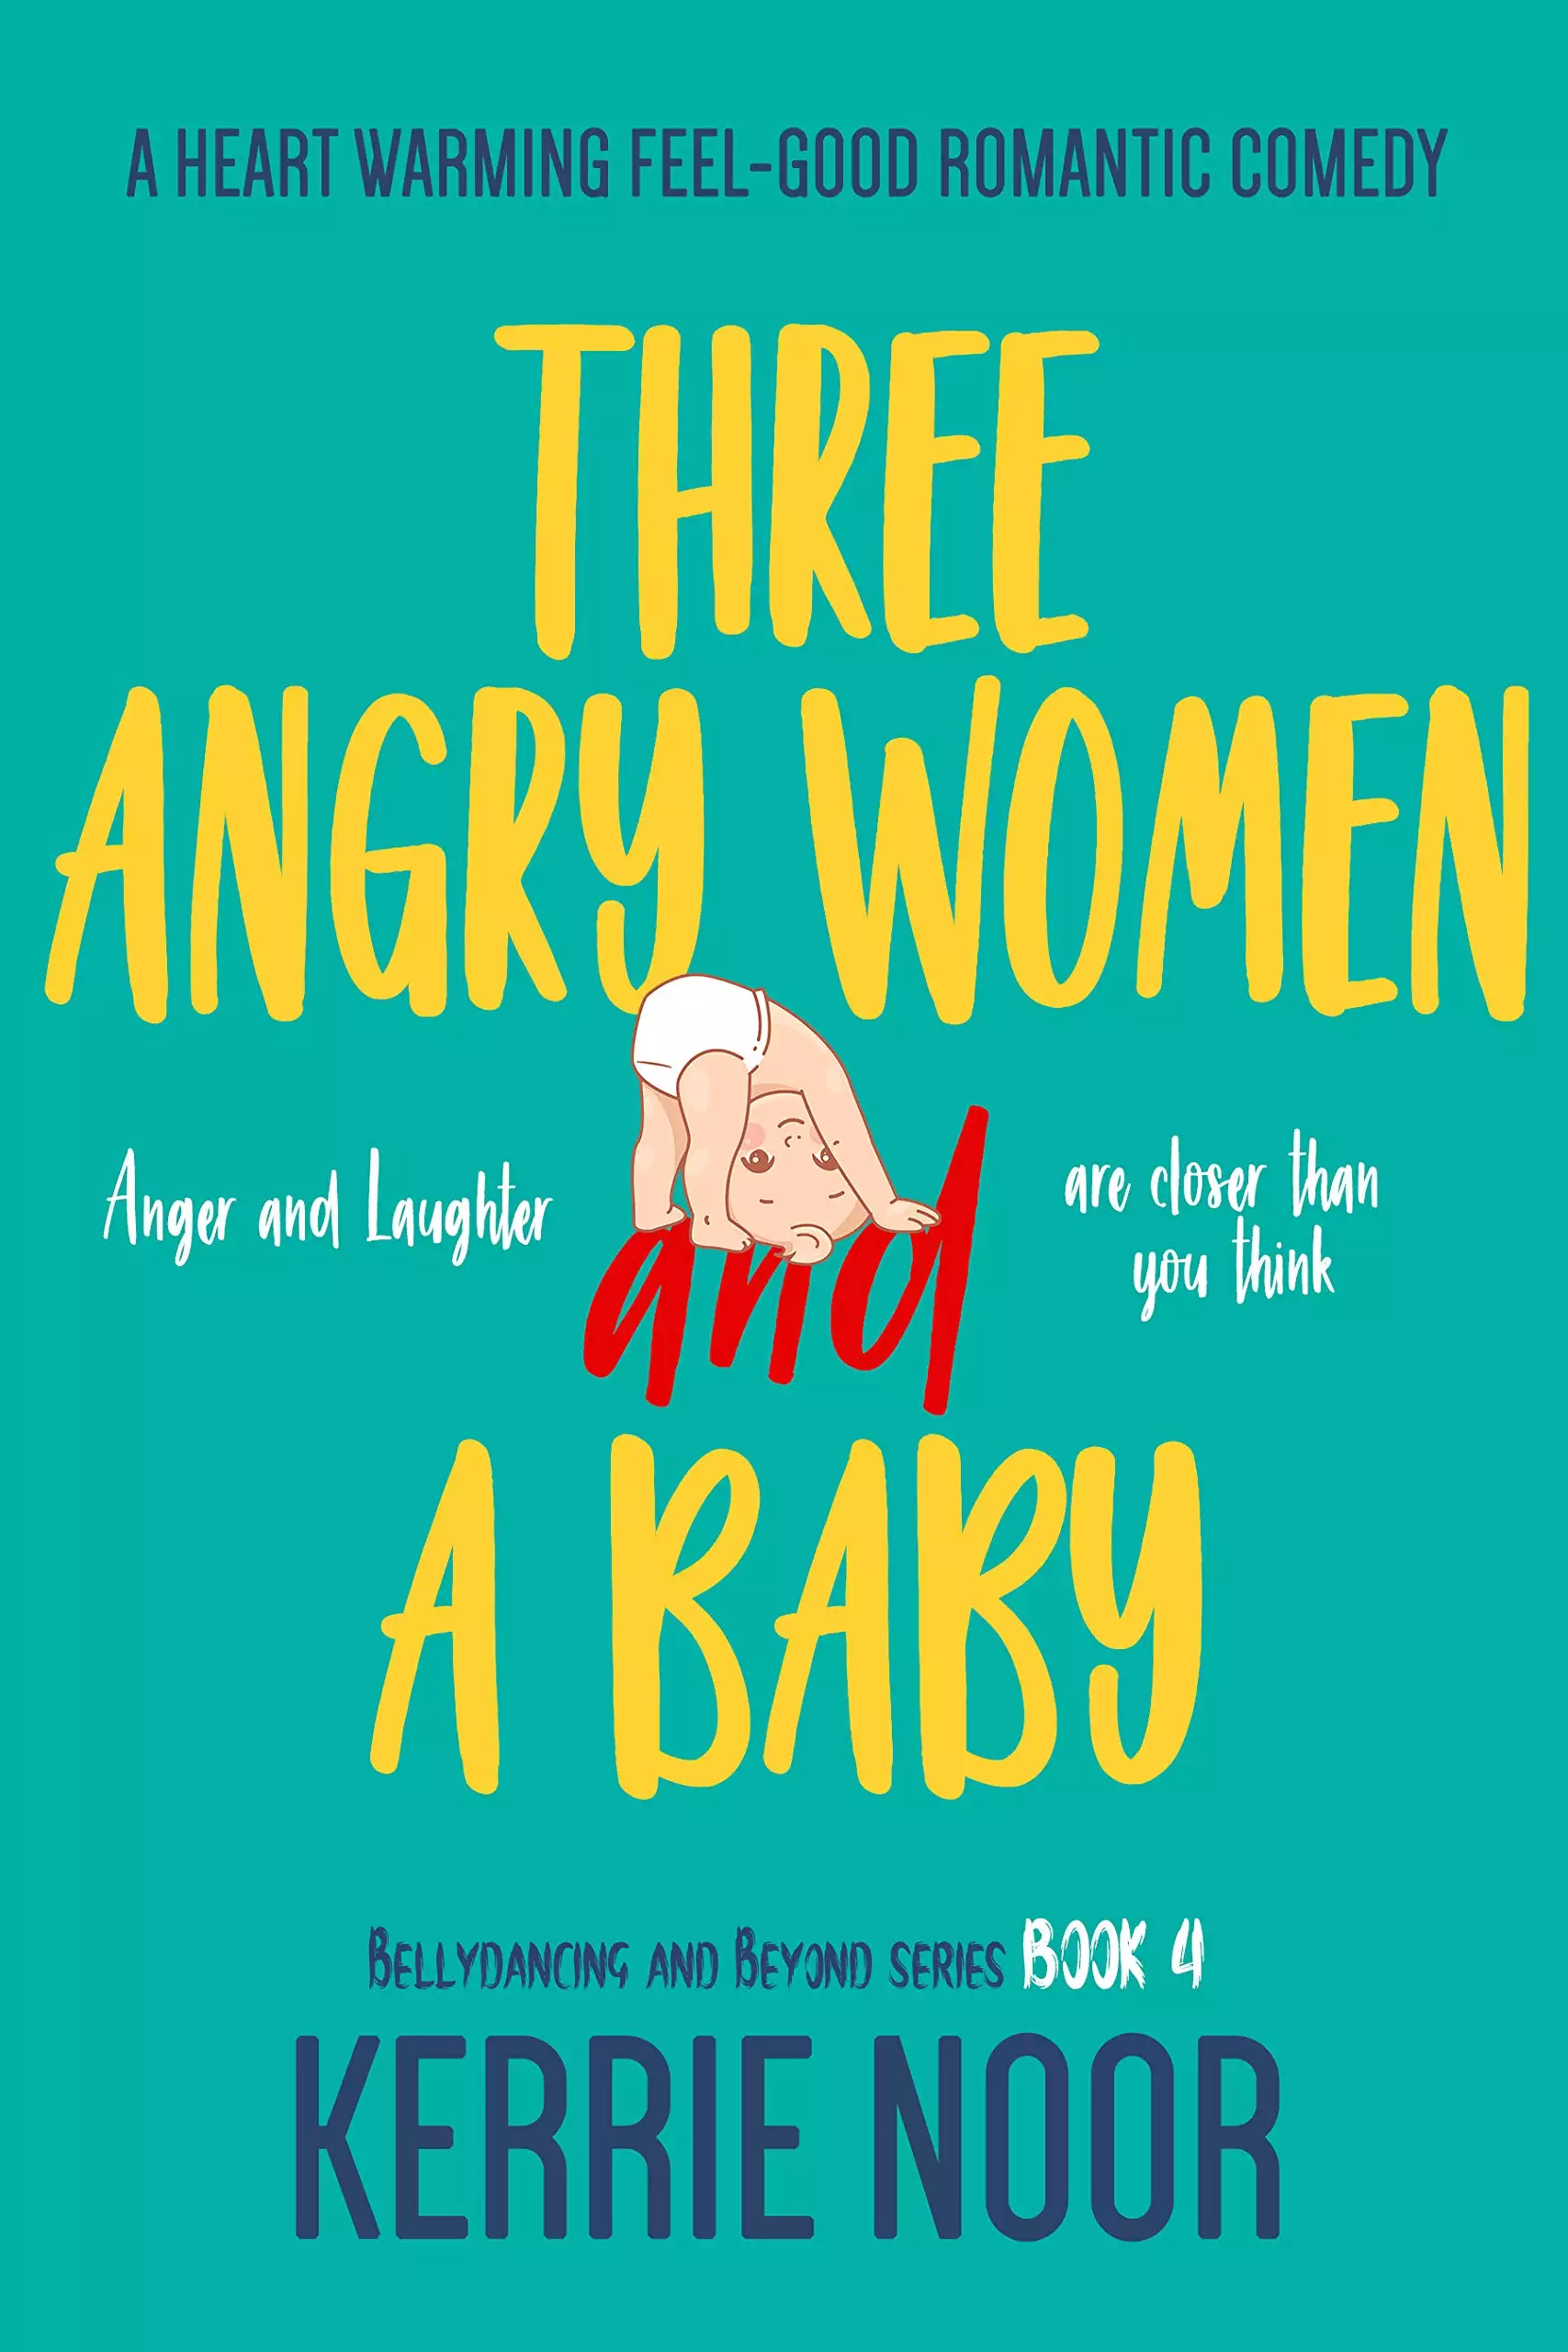 Three Angry Women And A Baby: A Heart Warming Feel-Good Romantic Comedy